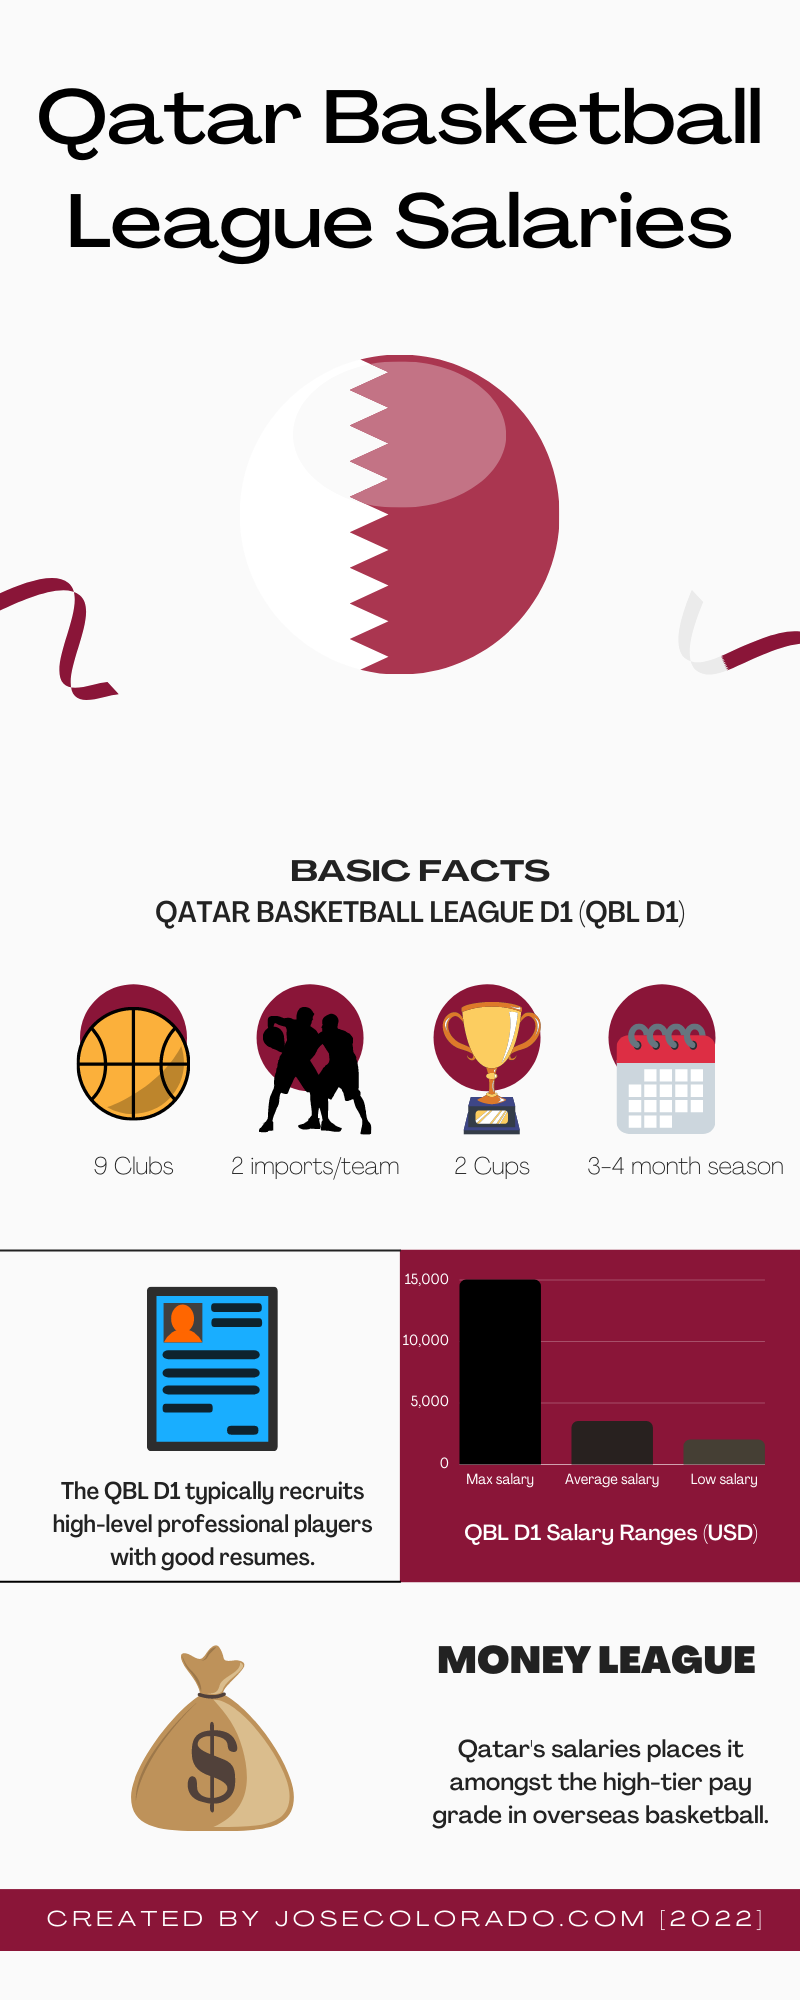 Qatar Basketball League Salaries can range from $2,000 - $15,000 USD/per month for overseas basketball players.